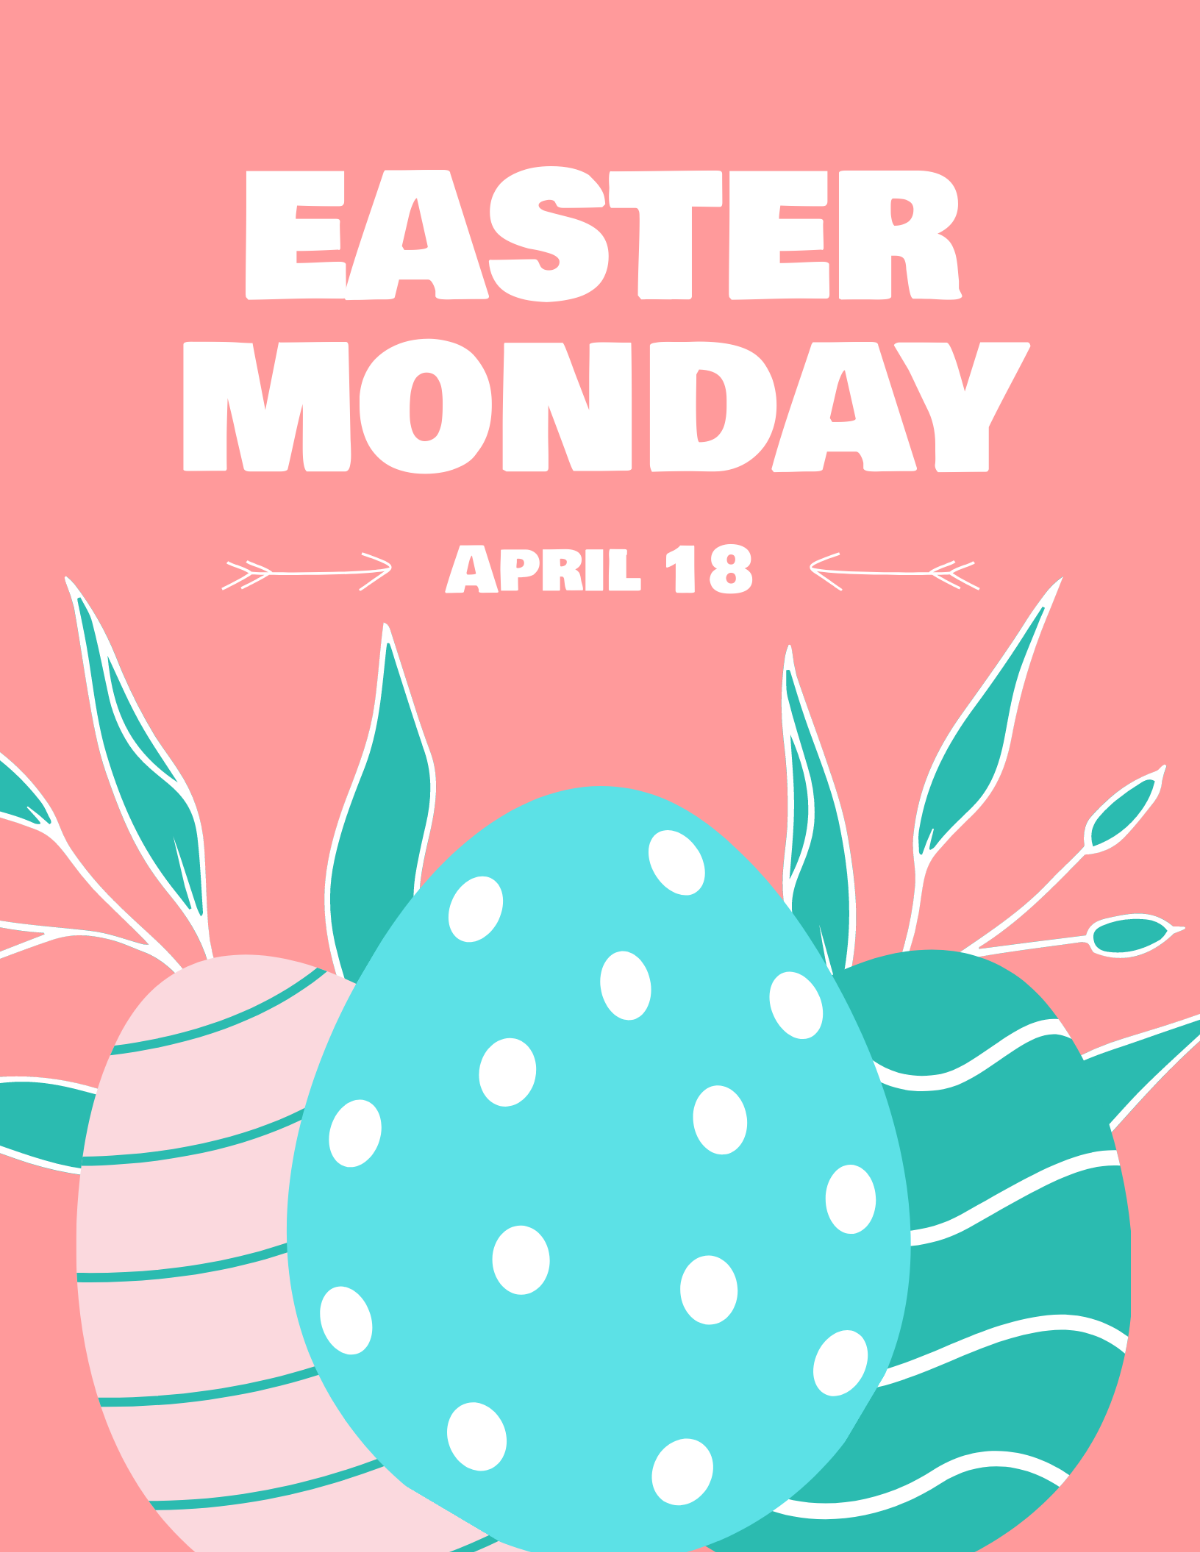 Free Easter Monday Flyer Template